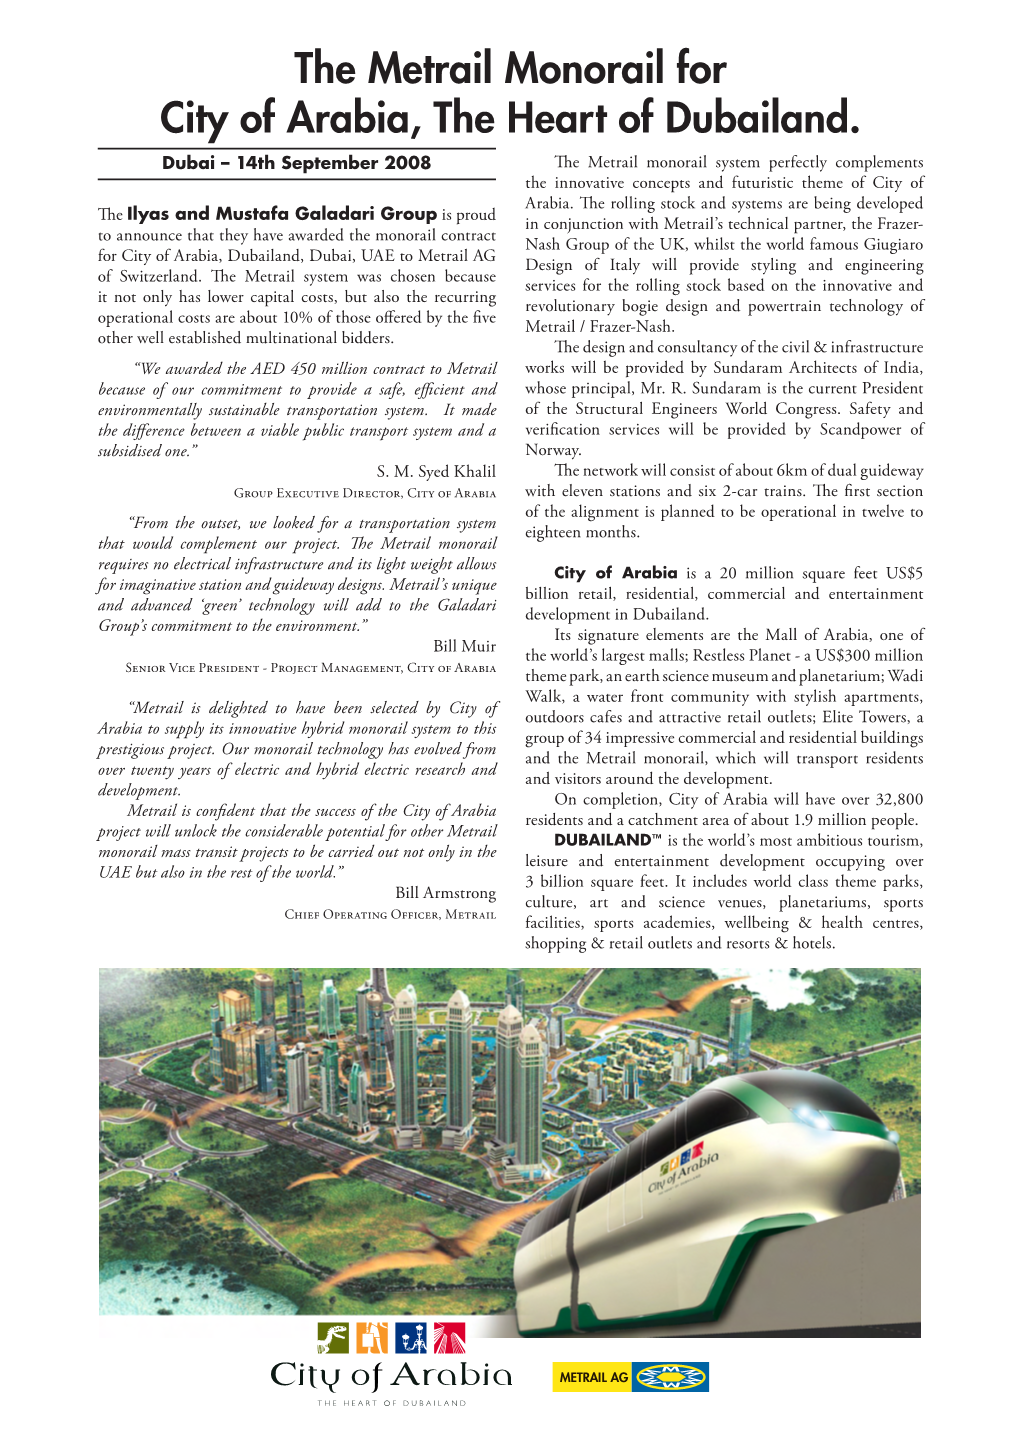 The Metrail Monorail for City of Arabia, the Heart of Dubailand